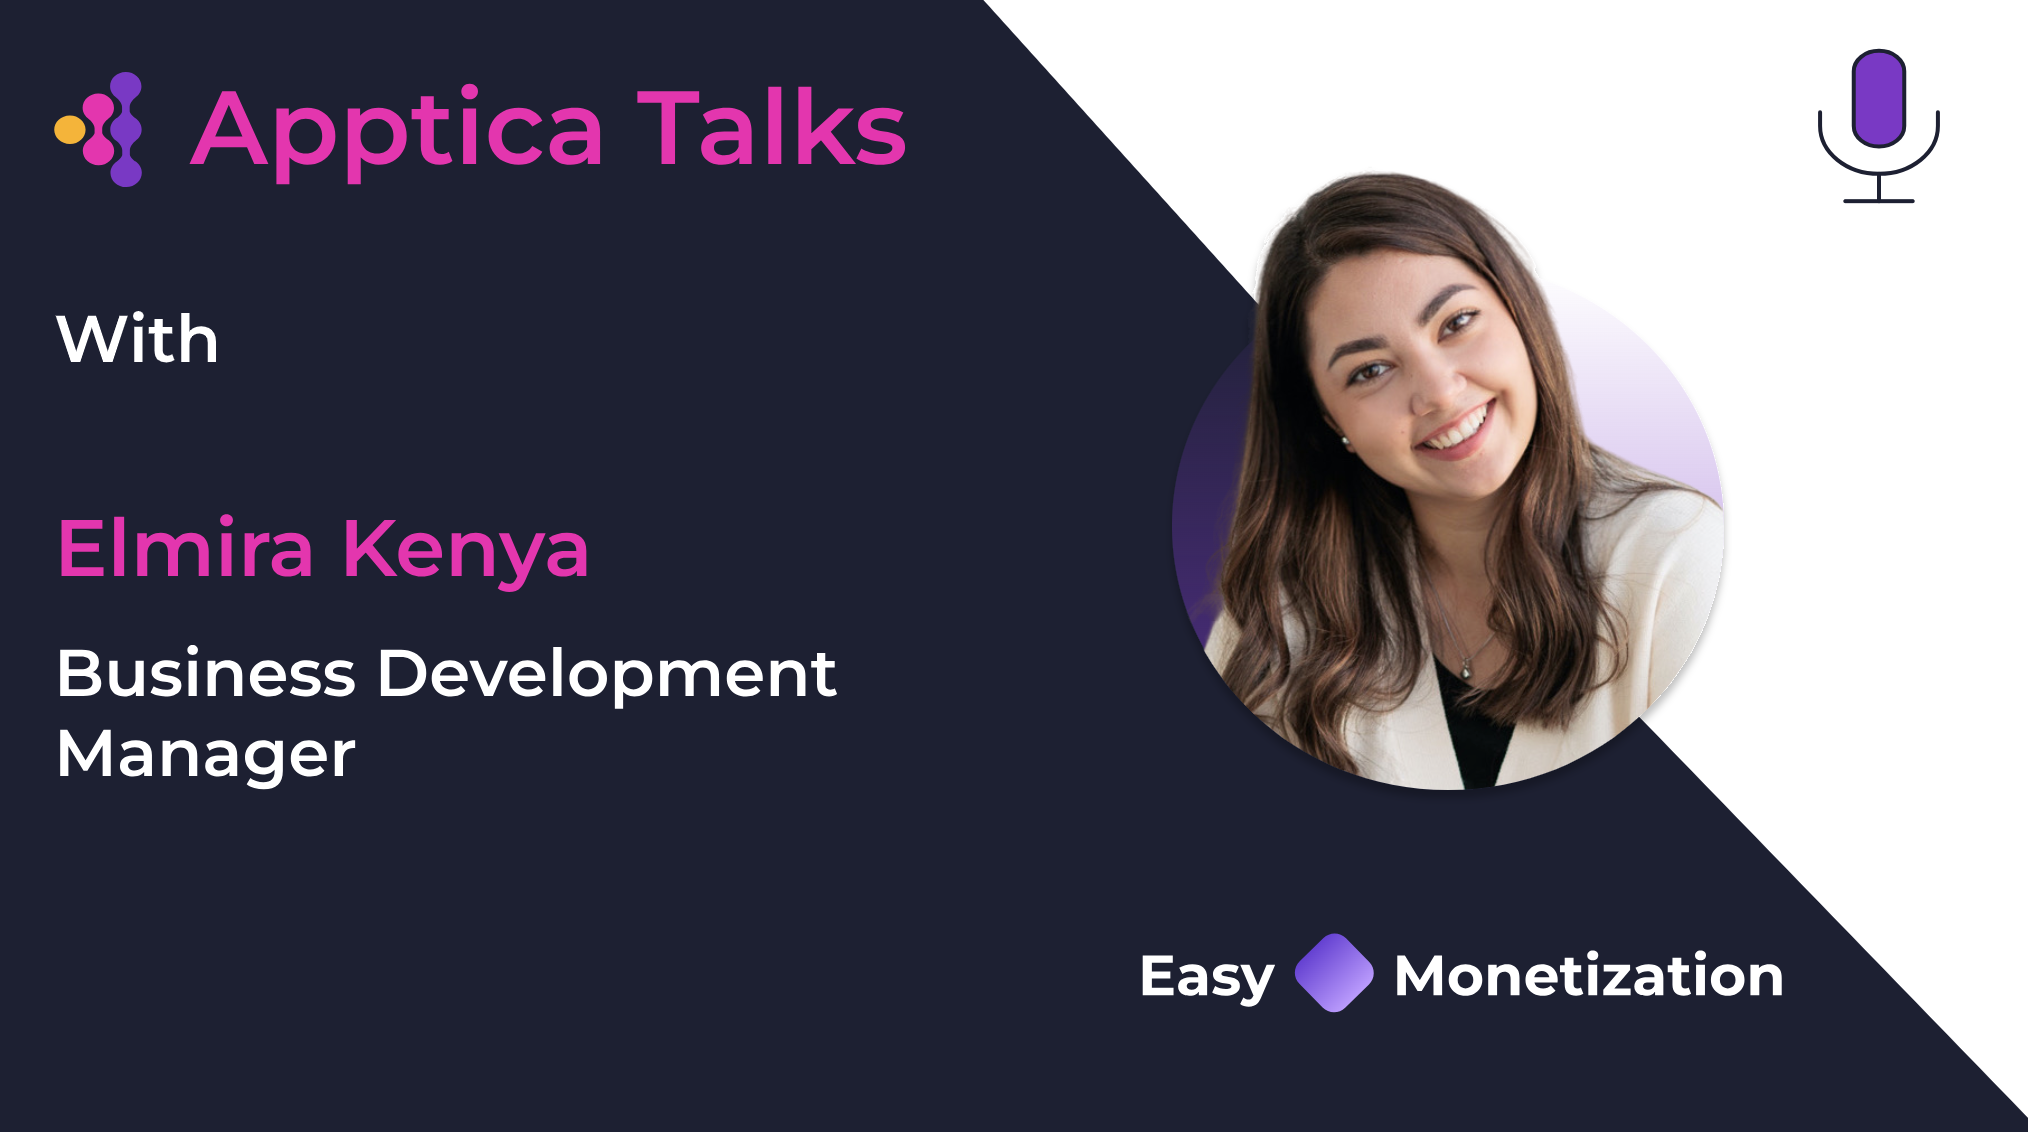 Apptica Talks. Episode #5. In-App Advertising: numbers, insights and recommendations with Elmira Kenya from Easy Monetization